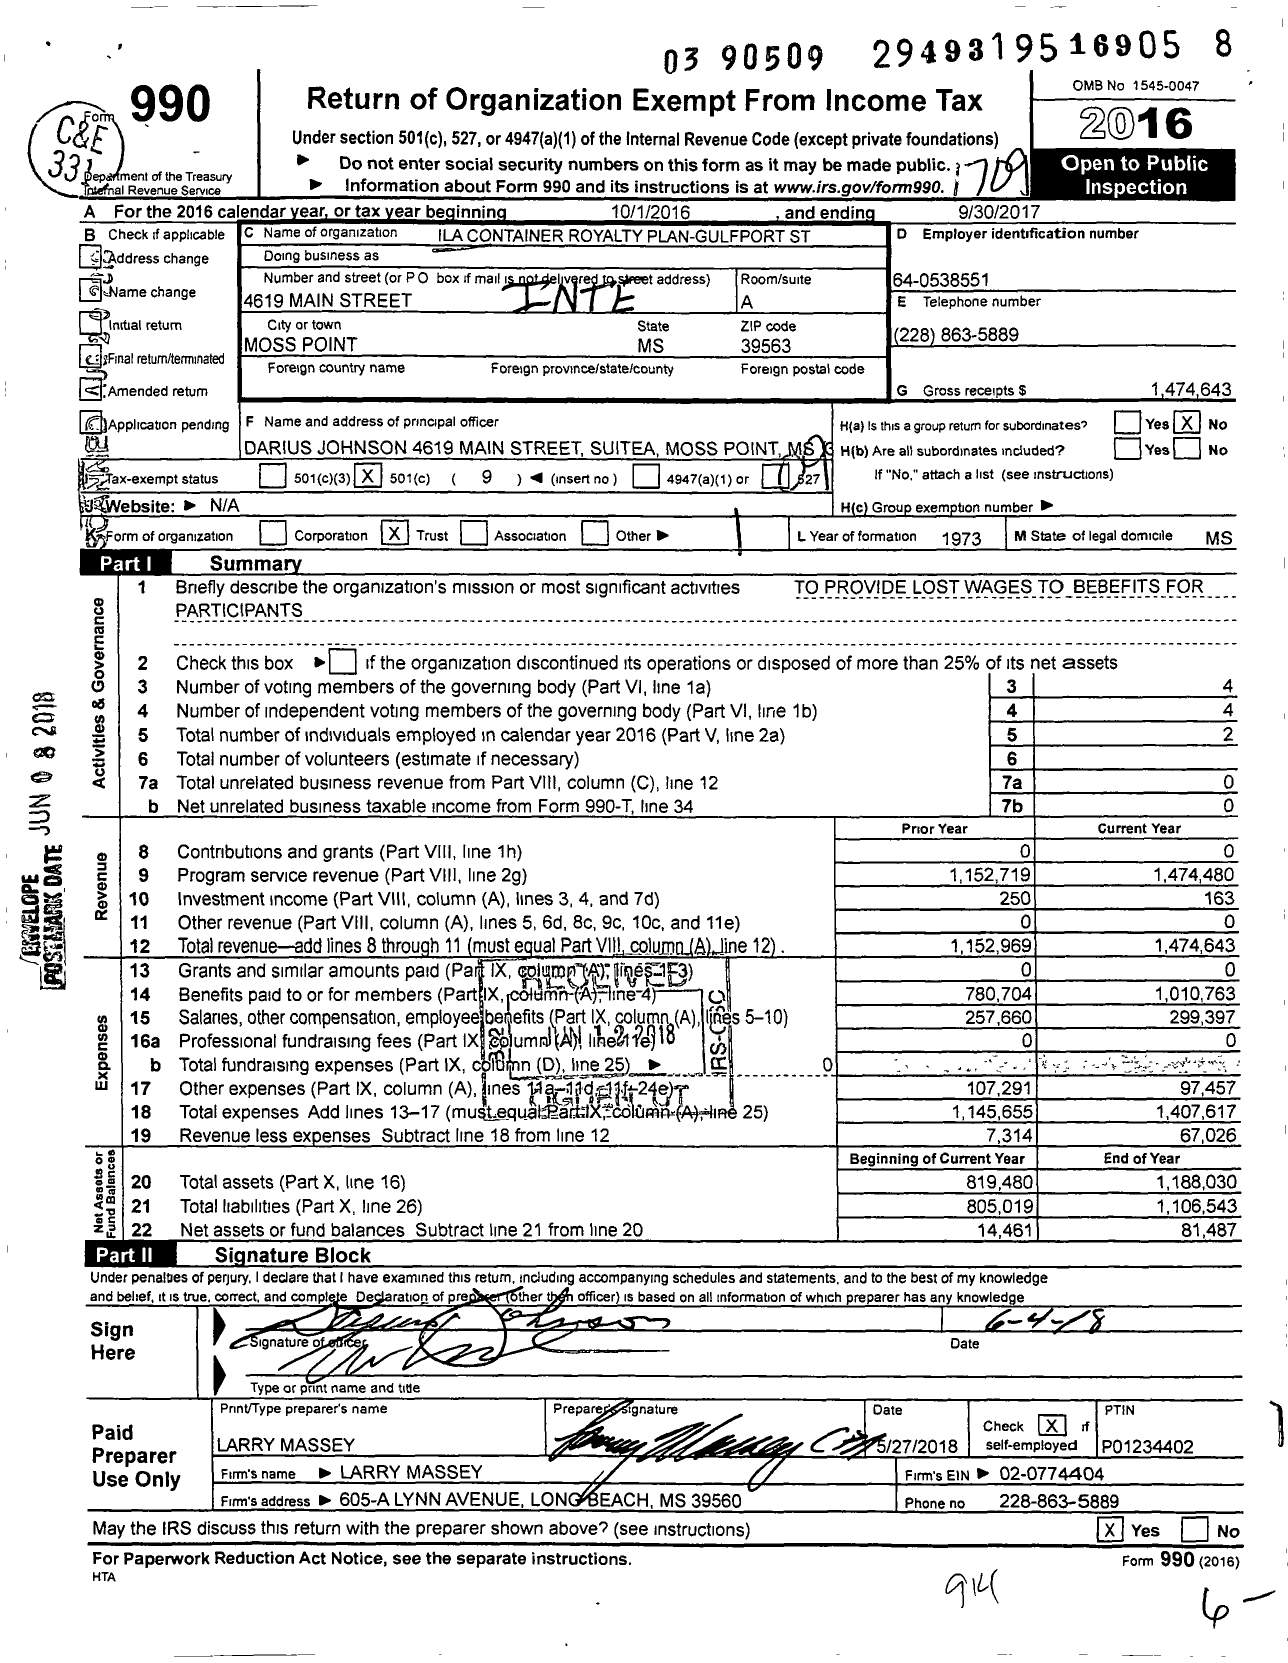 Image of first page of 2016 Form 990O for Ila Container Royalty Plan-Gulfport St